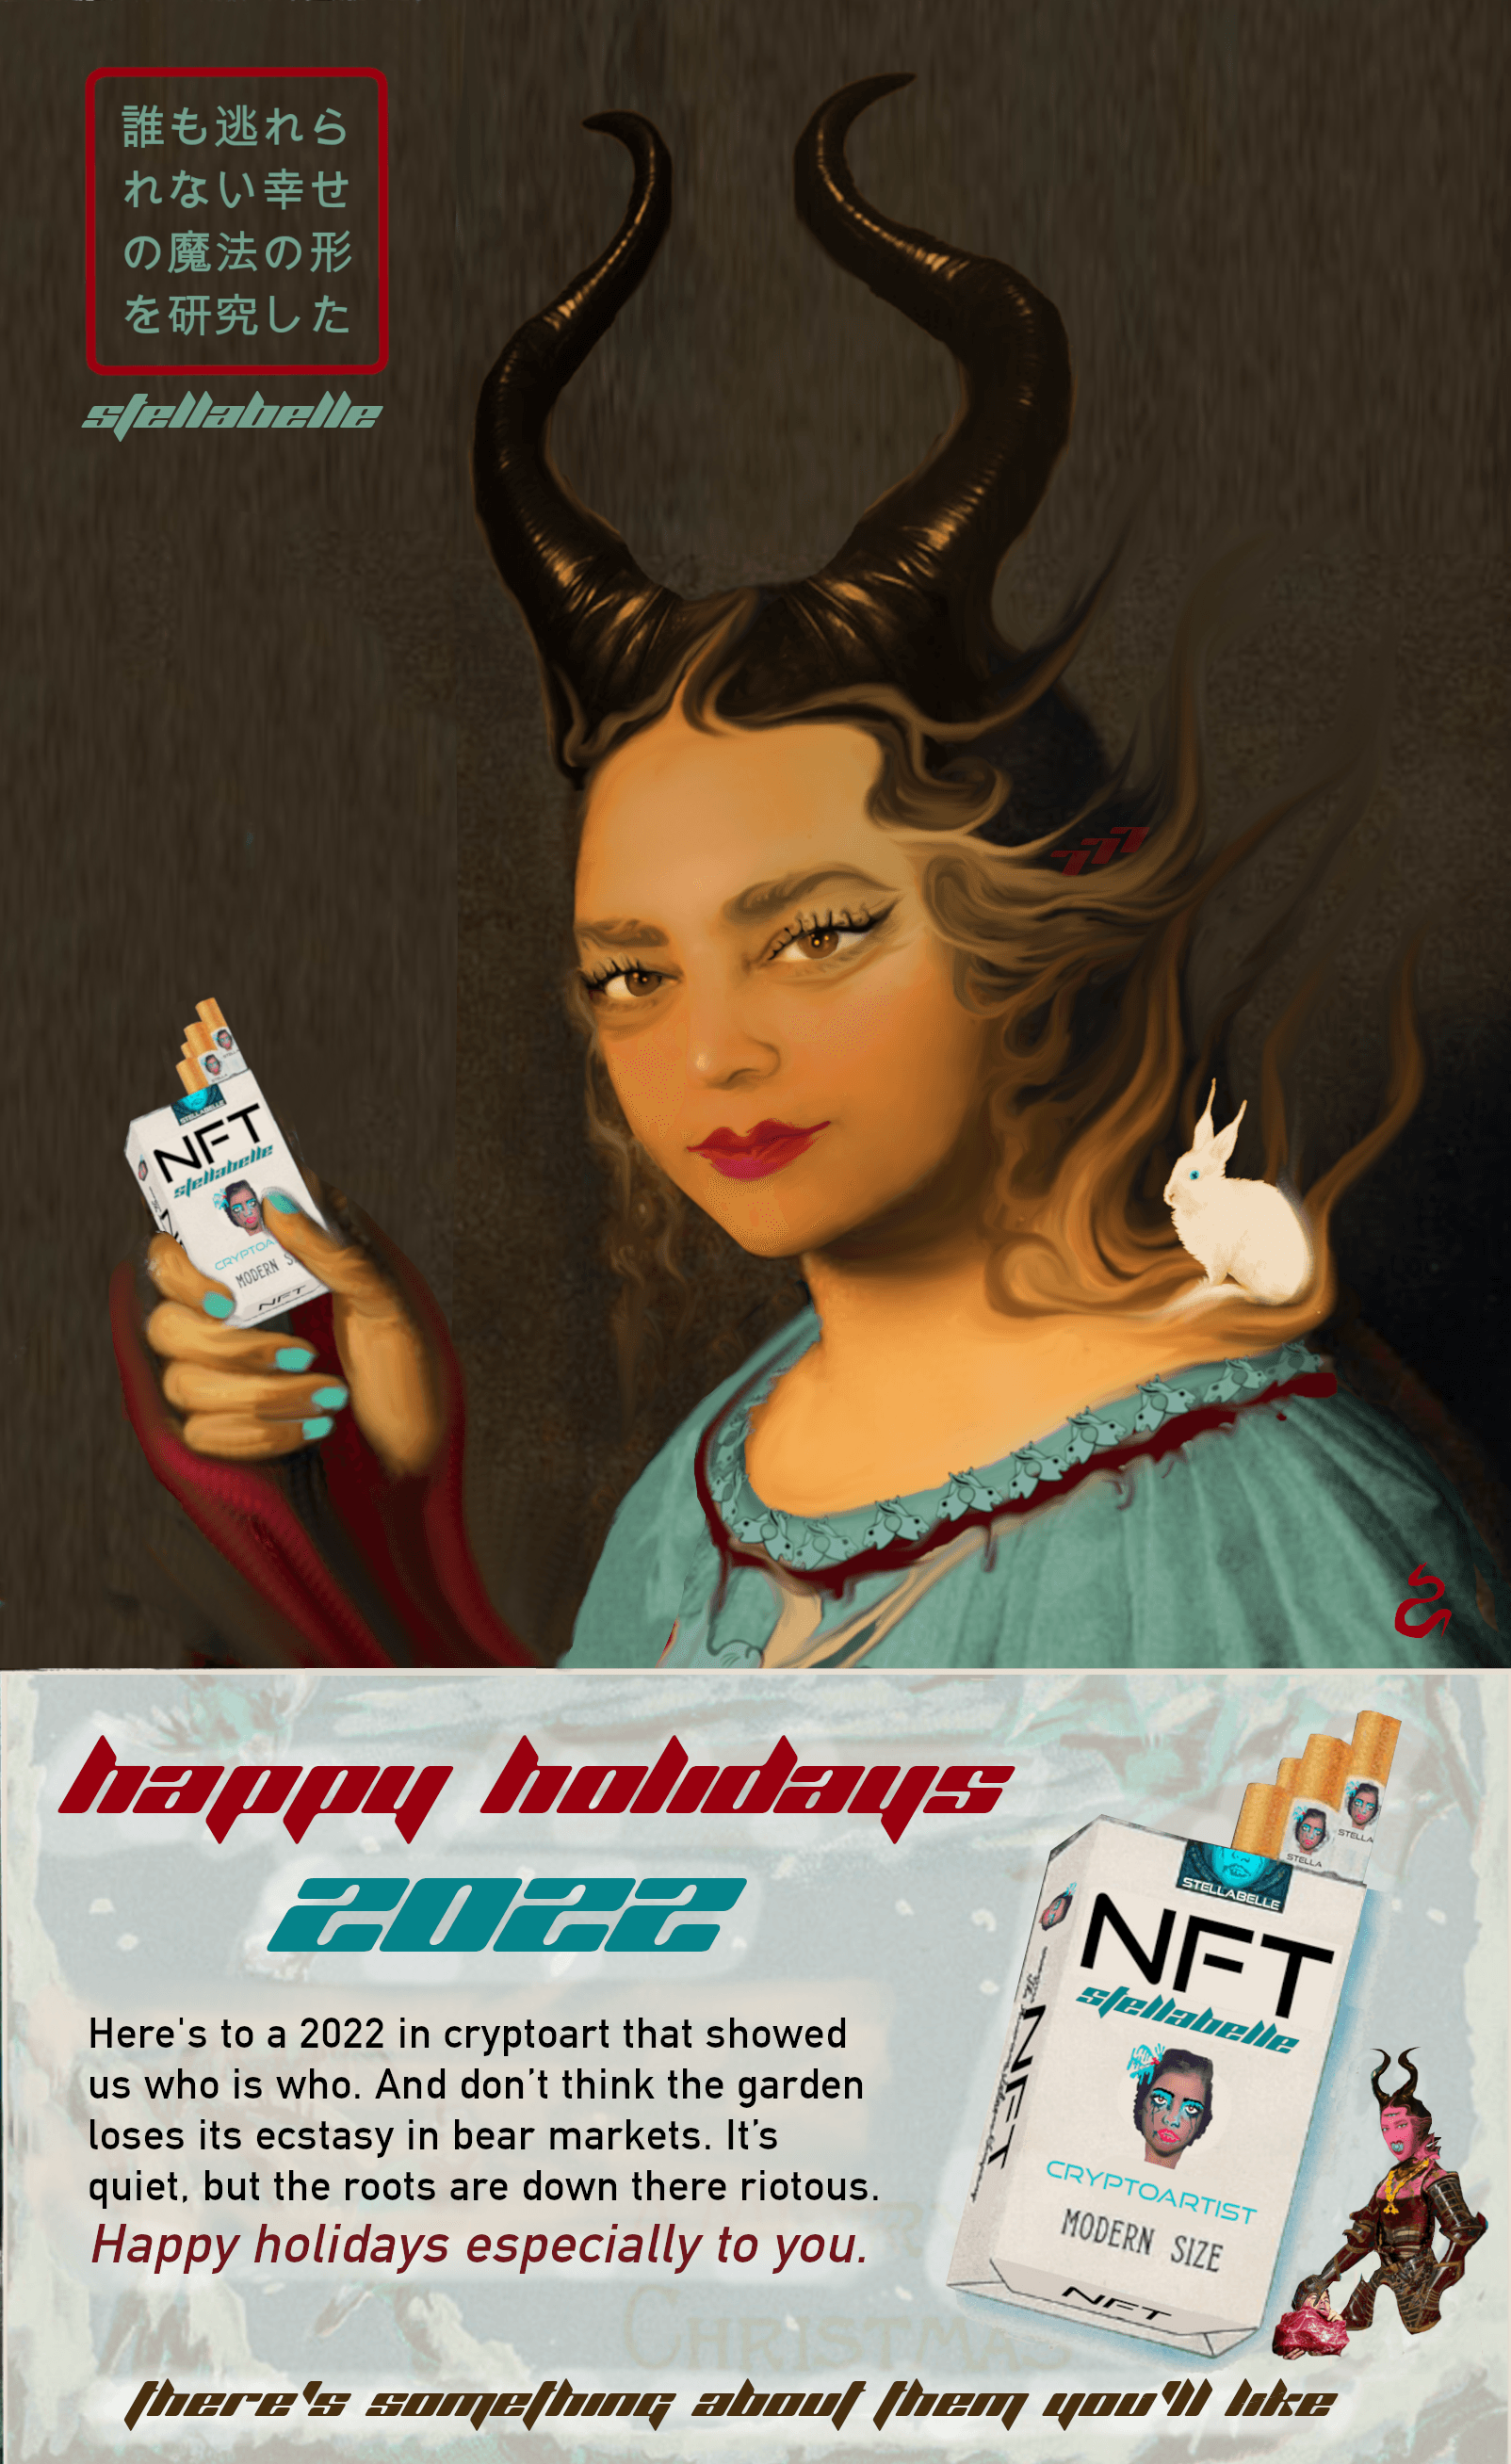 Stellabelle's 2022 Holiday Card